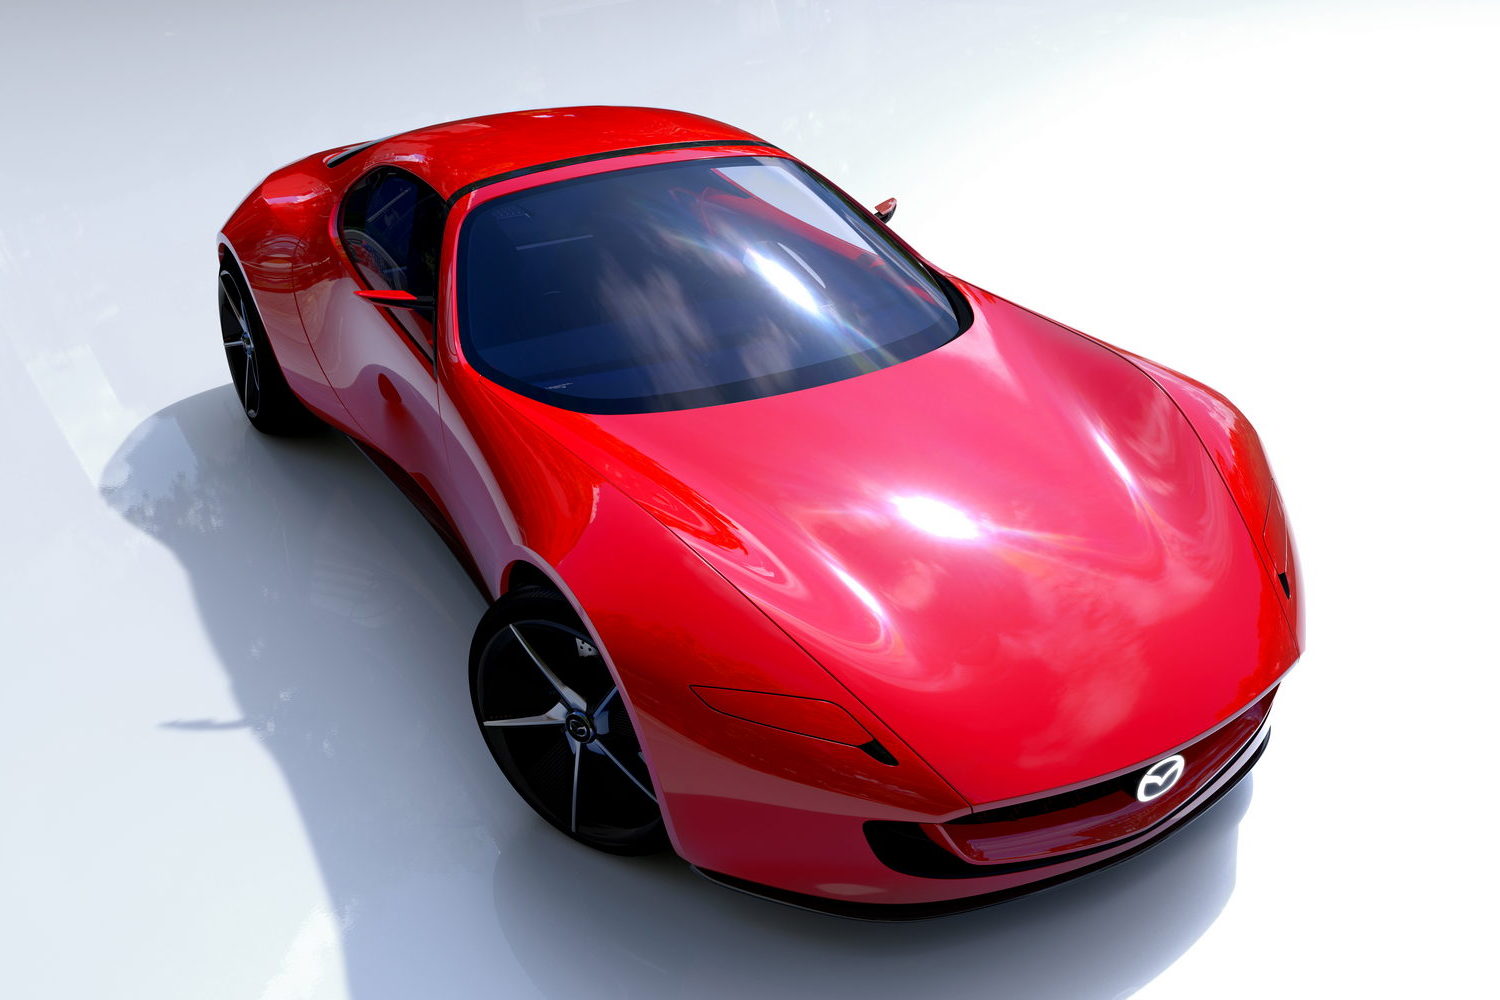 Mazda Iconic SP: an RX-9 for the EV age? Image by Mazda.